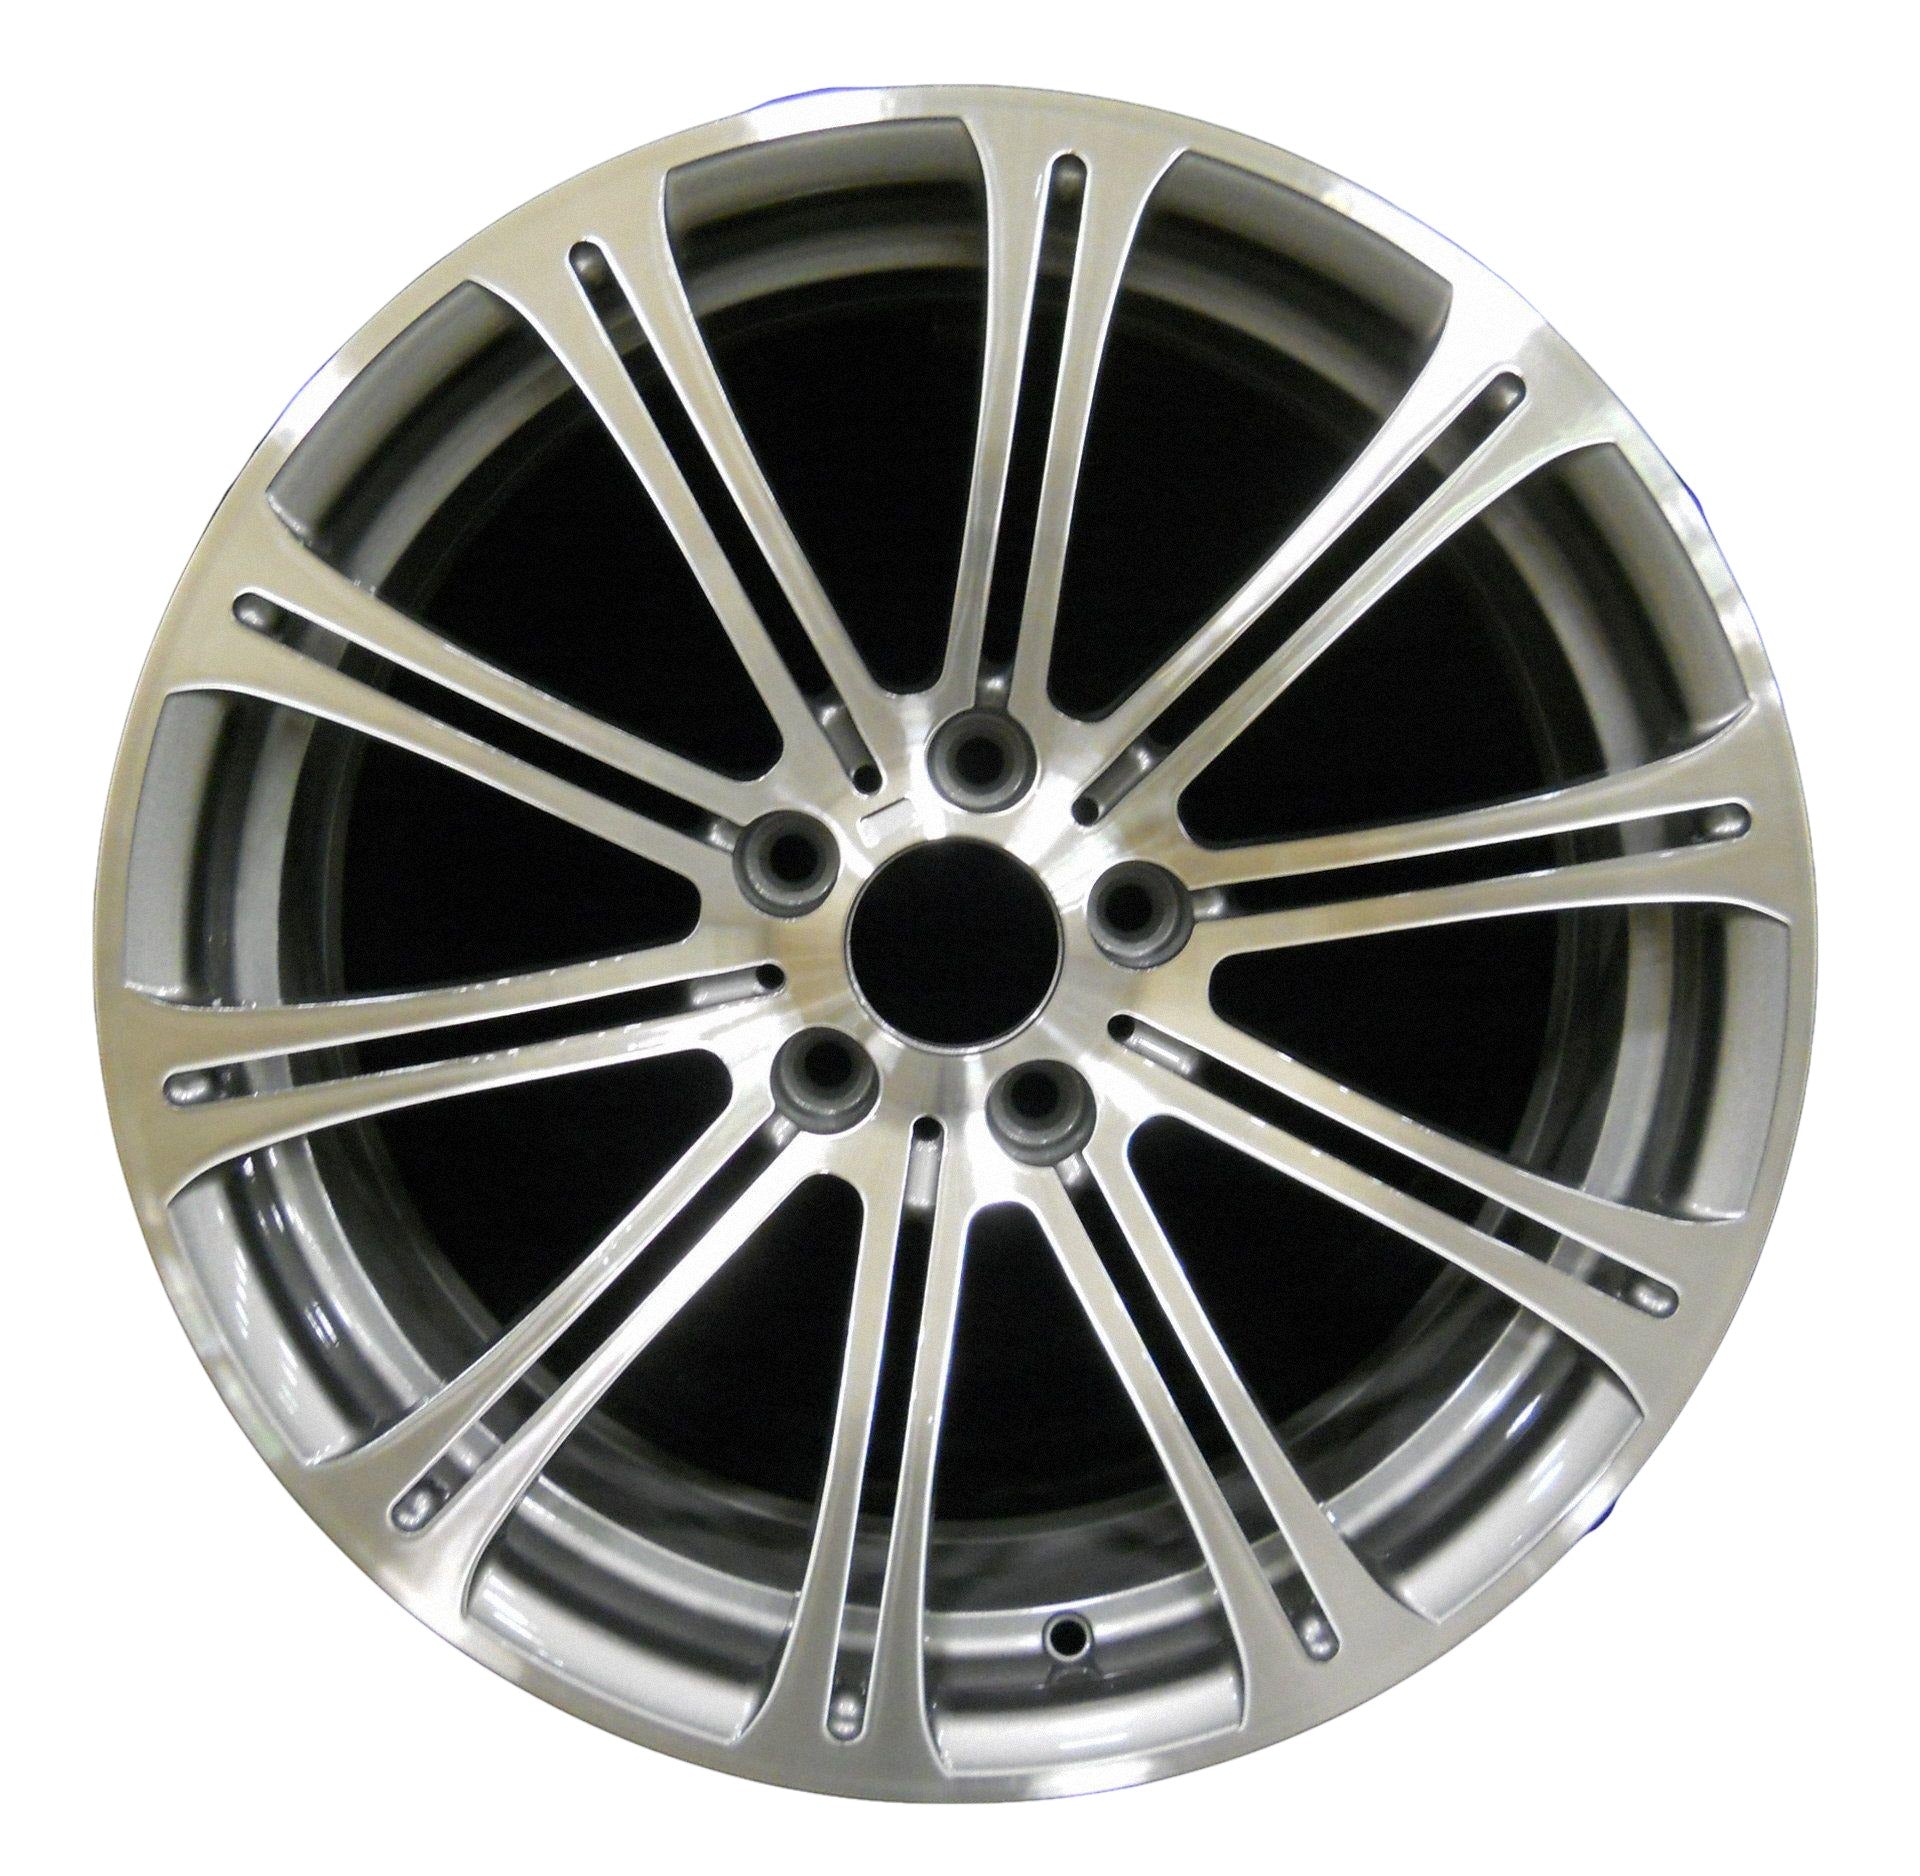 BMW M3  2008, 2009, 2010, 2011, 2012, 2013 Factory OEM Car Wheel Size 19x9.5 Alloy WAO.71235RE.LC23.MABRT